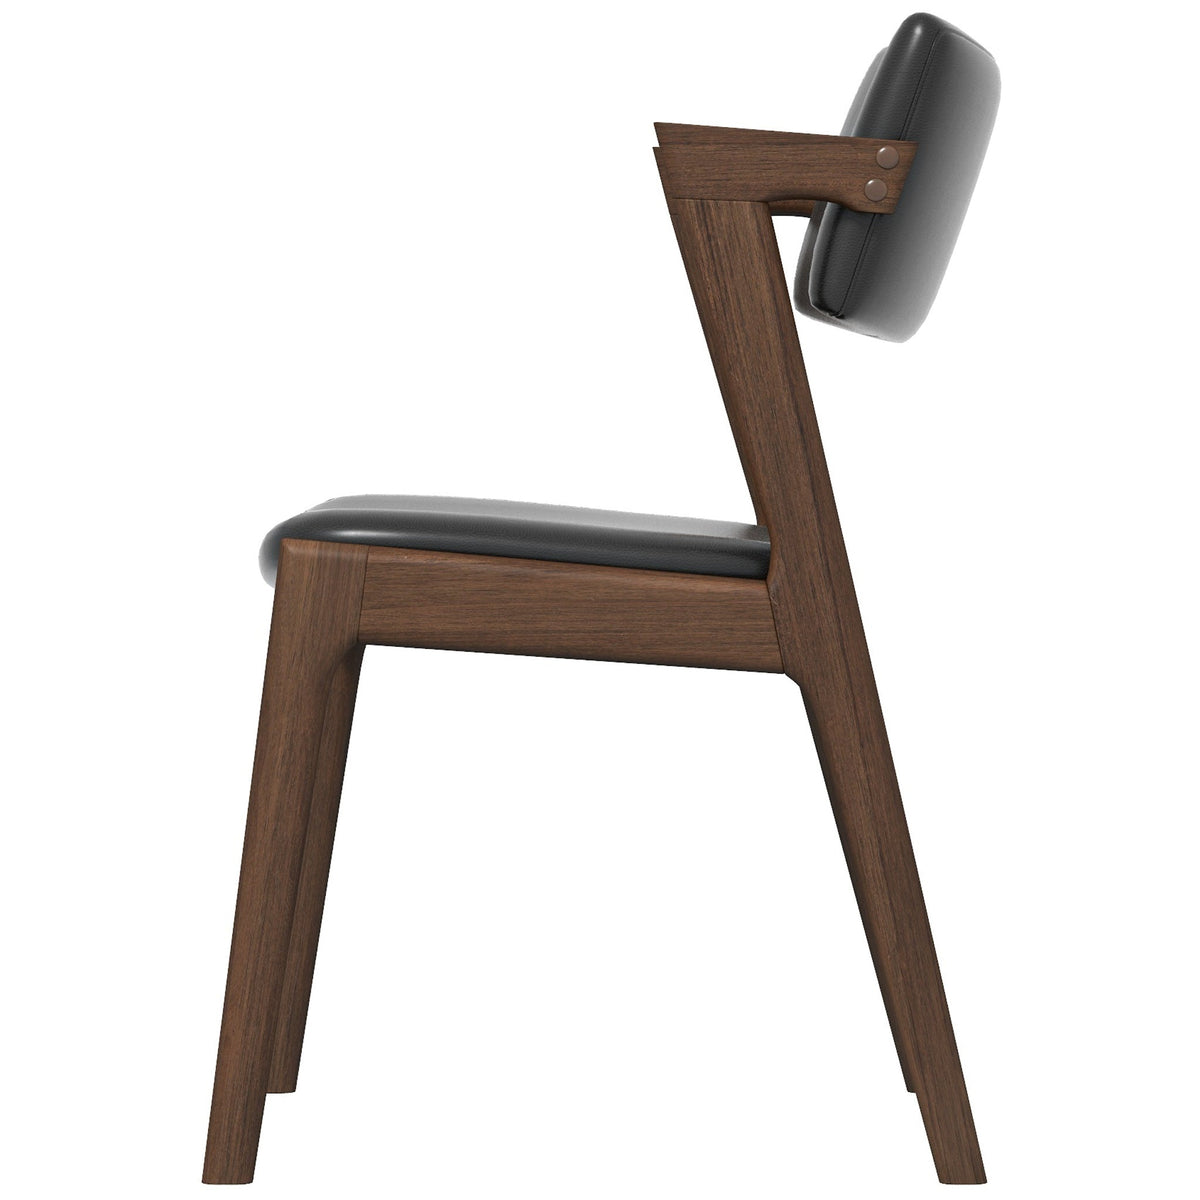 Ricco Dining Chair - Black Leather | MidinMod | Houston TX | Best Furniture stores in Houston